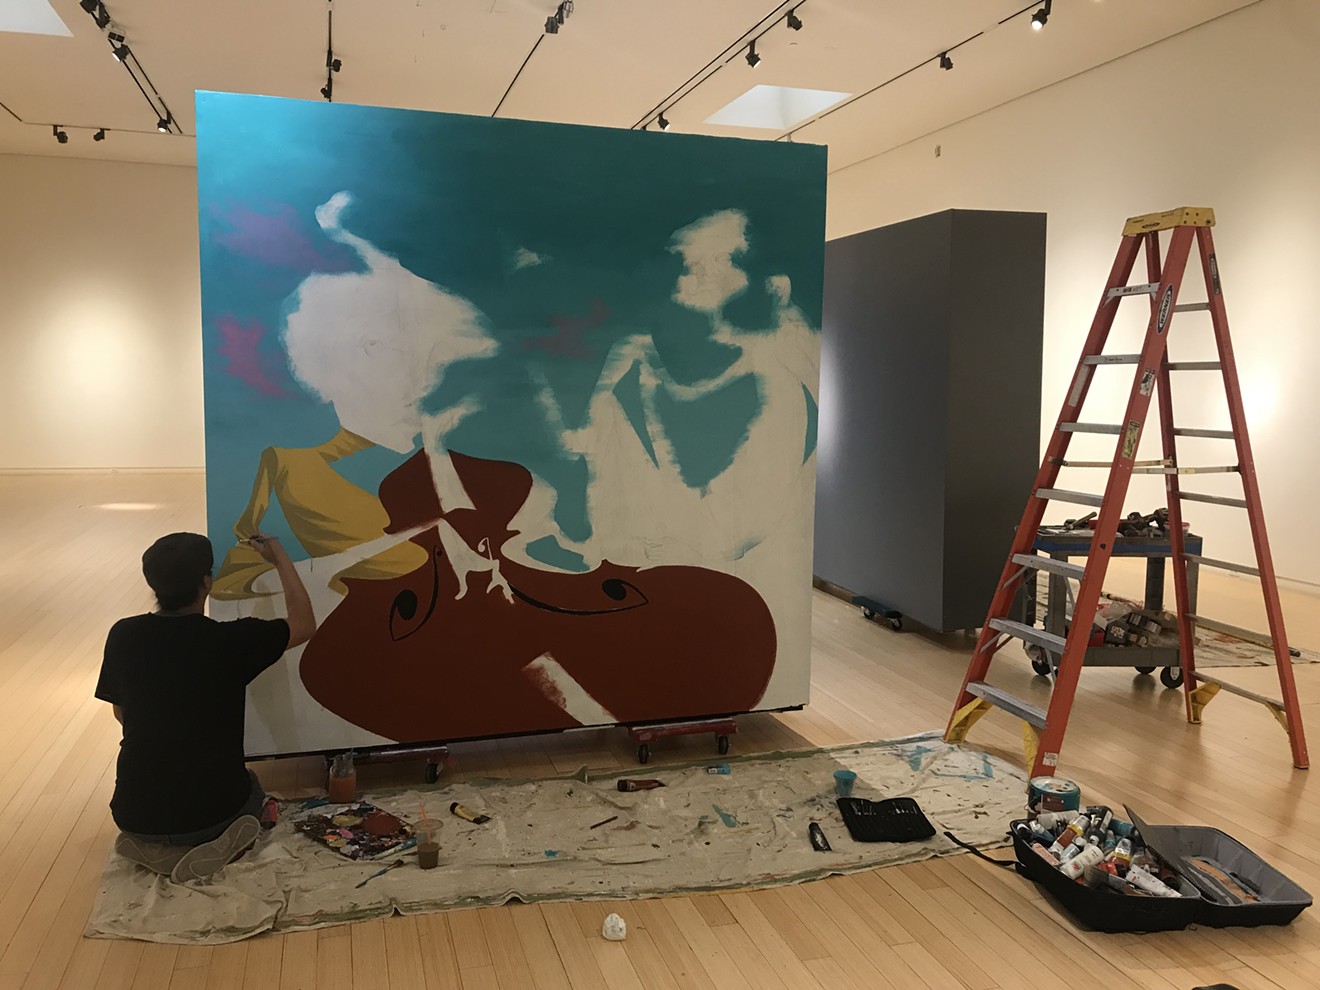 Tato Caraveo paints a mural for the "Jazz It Up!" exhibit at Mesa Contemporary Arts Museum.